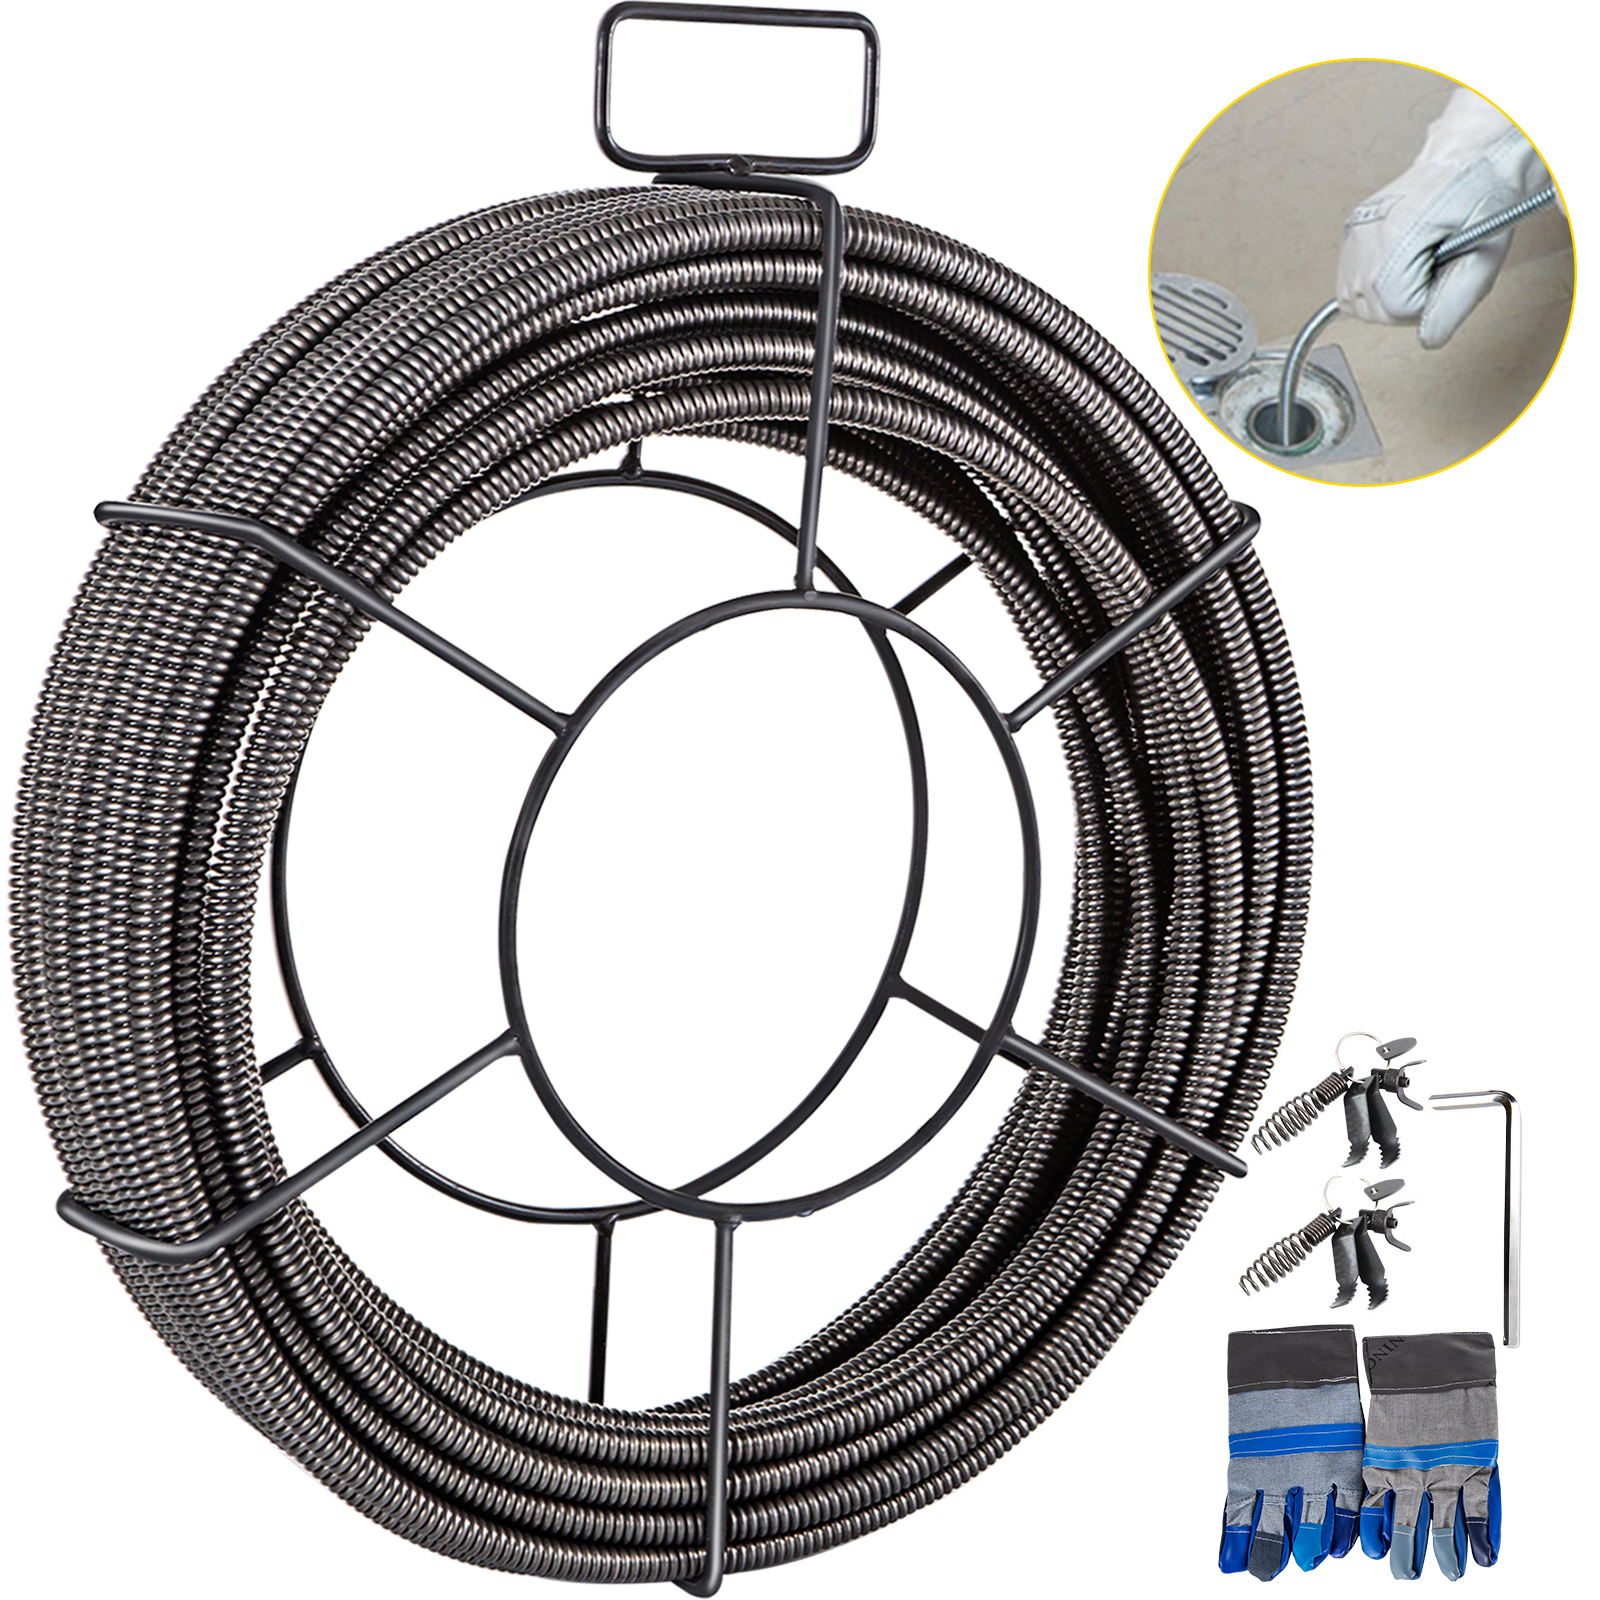 Drain Cable Sewer Cable 100'x1/2" Drain Cleaning Cable Auger Snake Pipe от Vevor Many GEOs